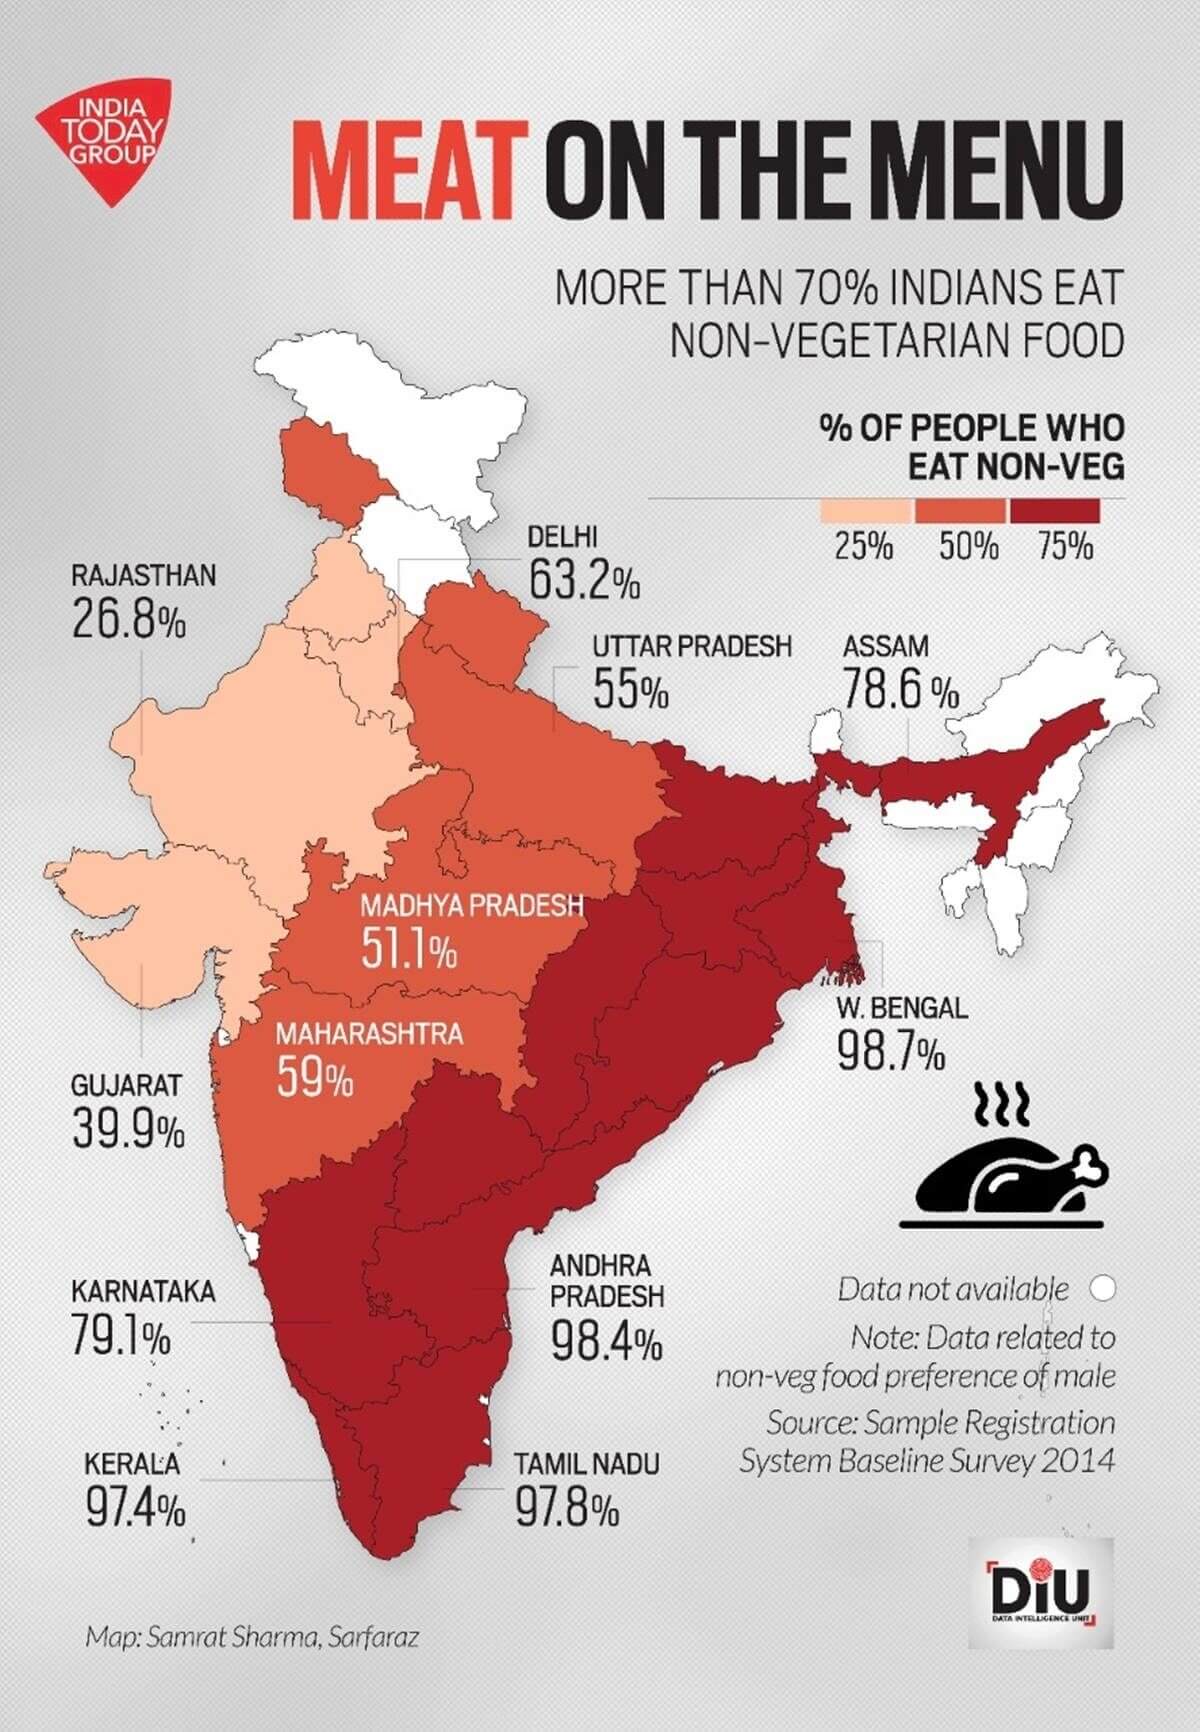 7 out of 10 people consume non-vegetarian items in India.